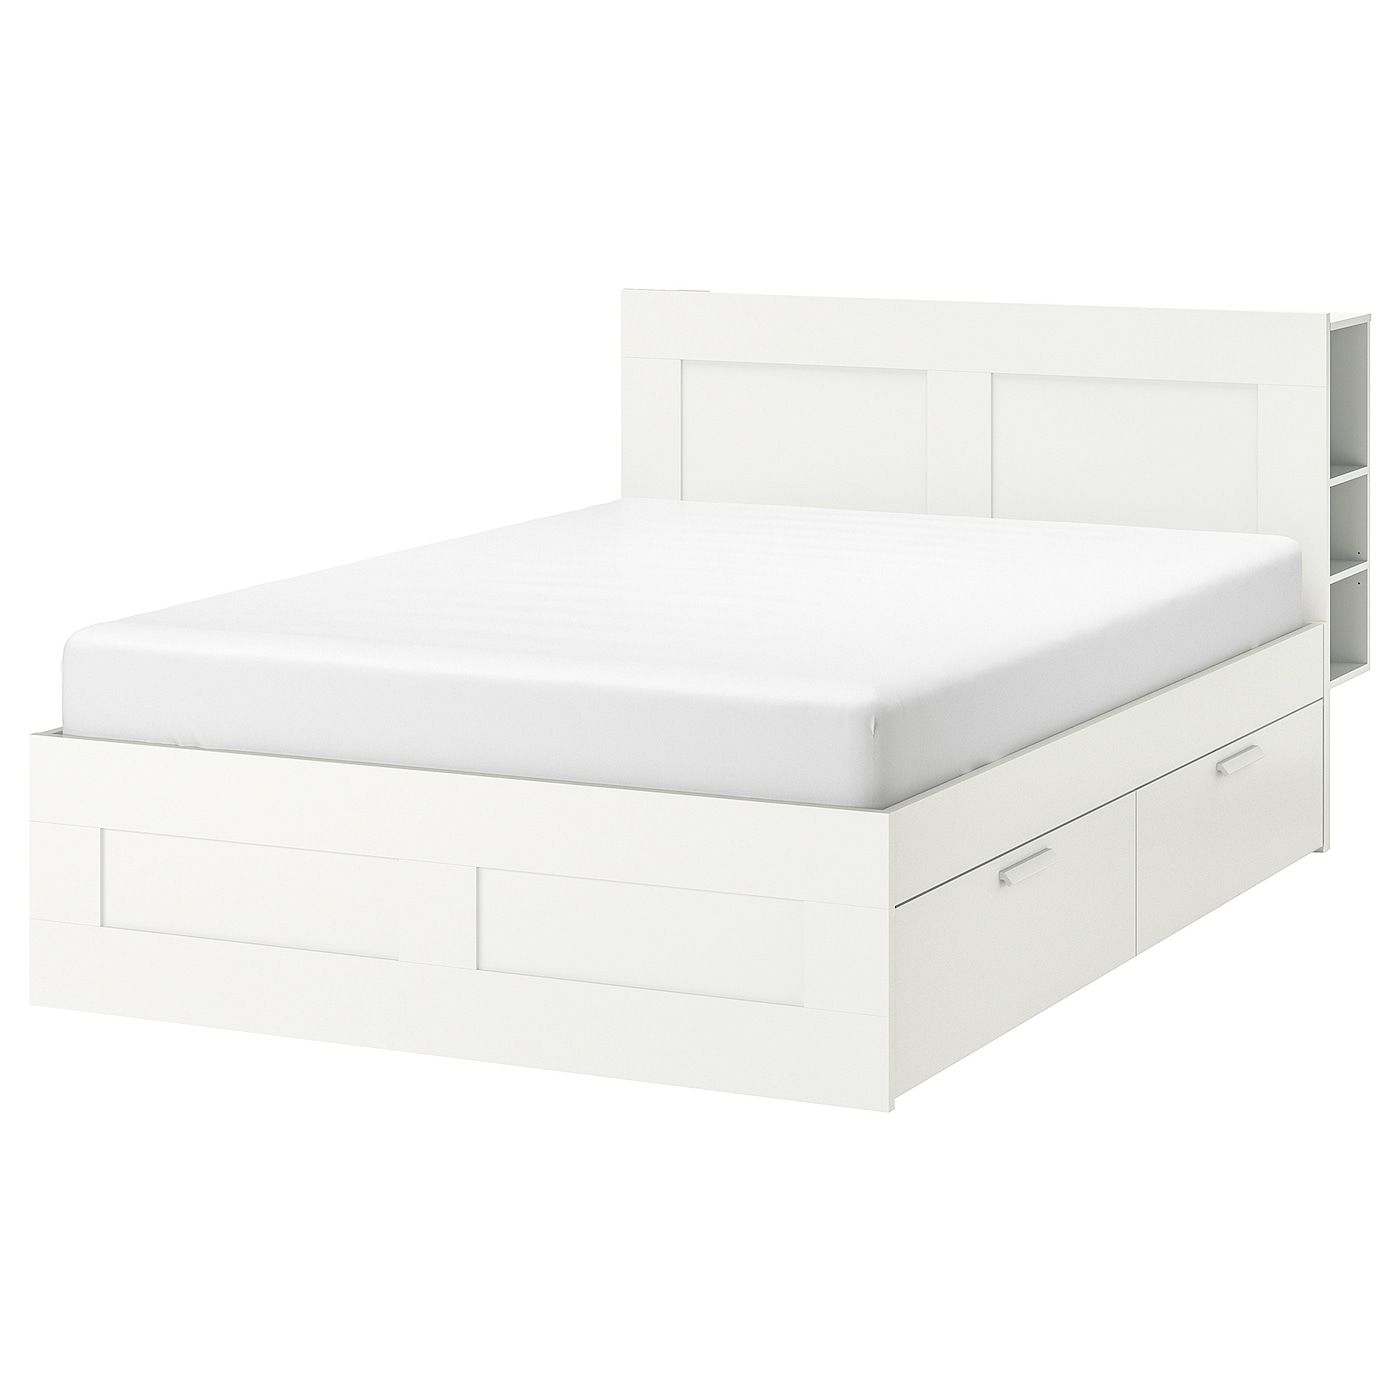 13 Best Bed Frames Of 2021 Top, Full Size Bed Frame With Headboard And Box Spring